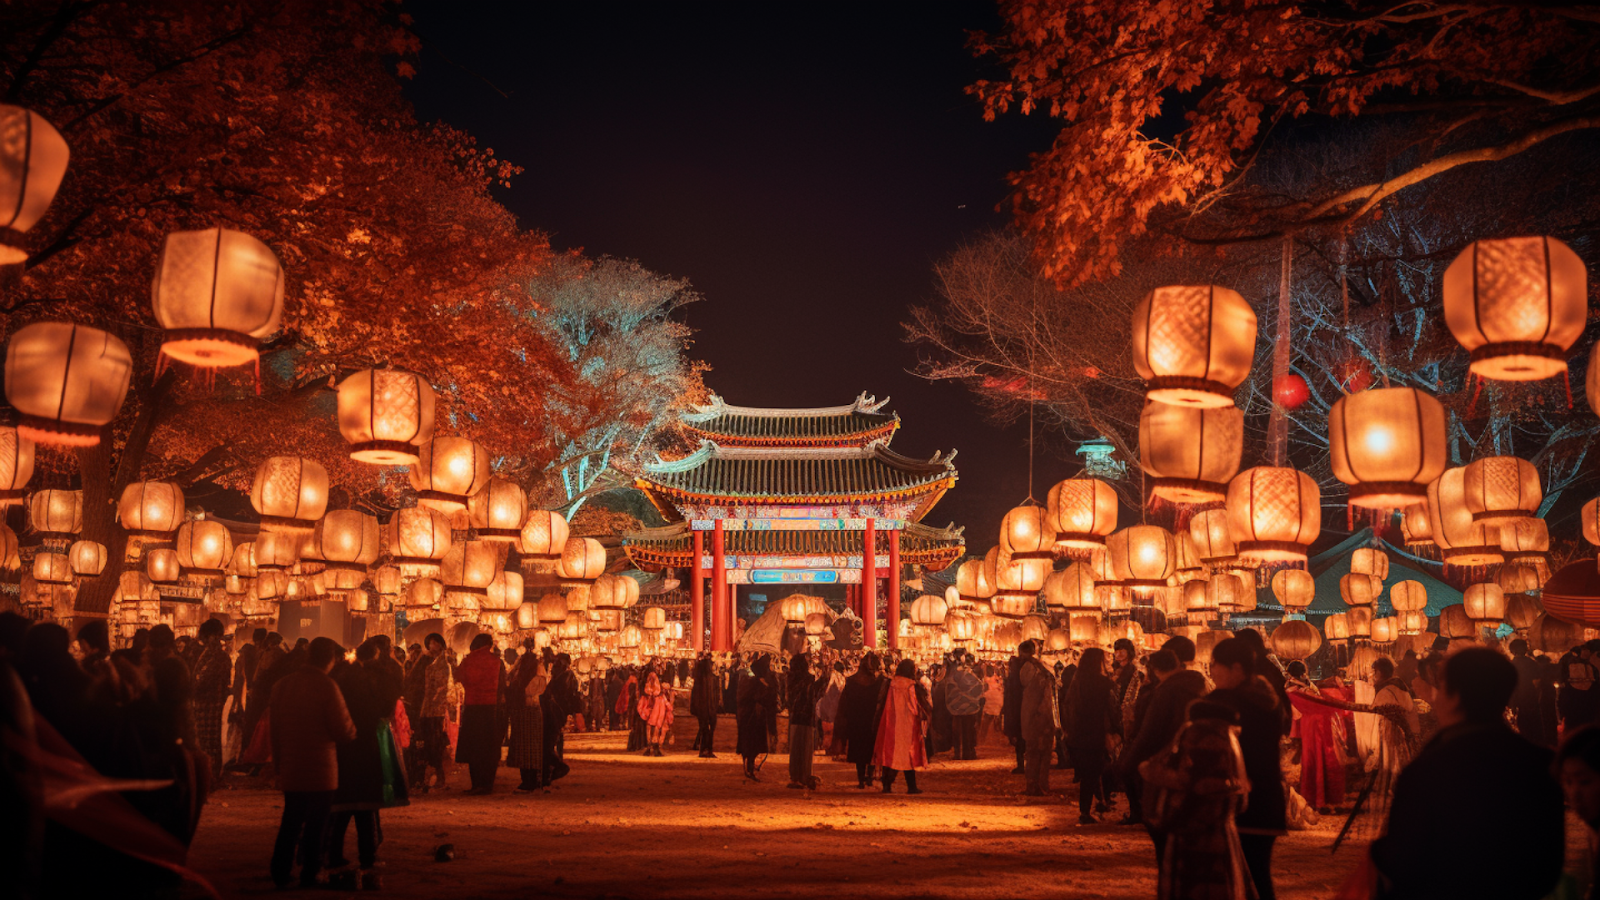 A traditional gate stands aglow at the Seoul Lantern Festival, surrounded by a sea of lanterns and festive attendees.